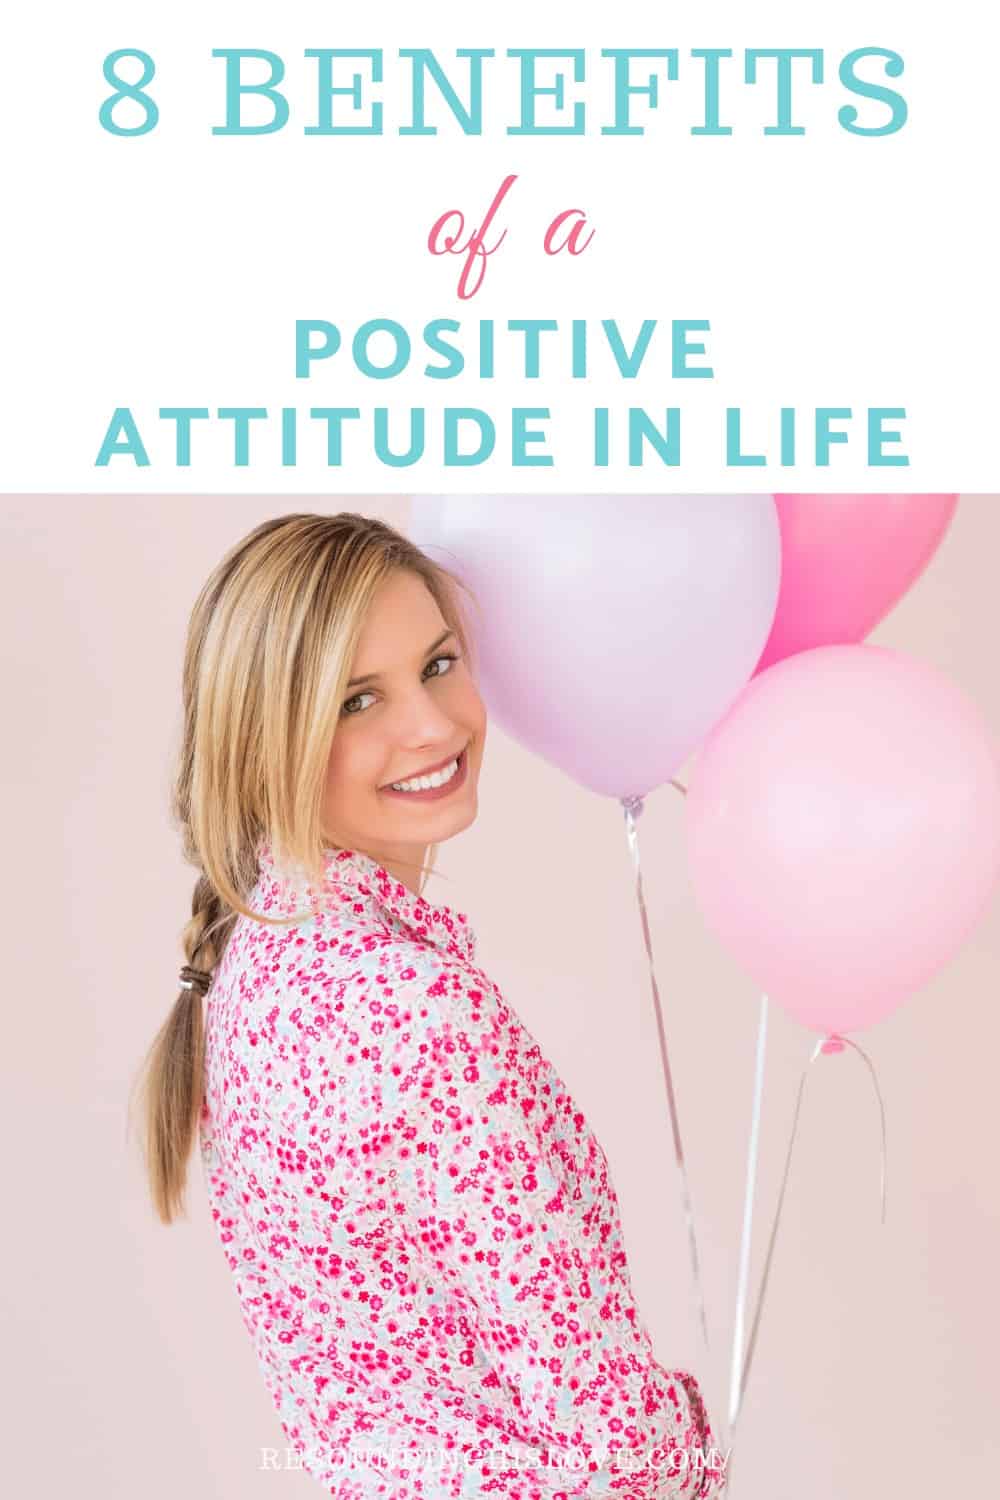 an image of a woman smiling holding balloons with text reading 8 Benefits of a Positive Attitude in Life